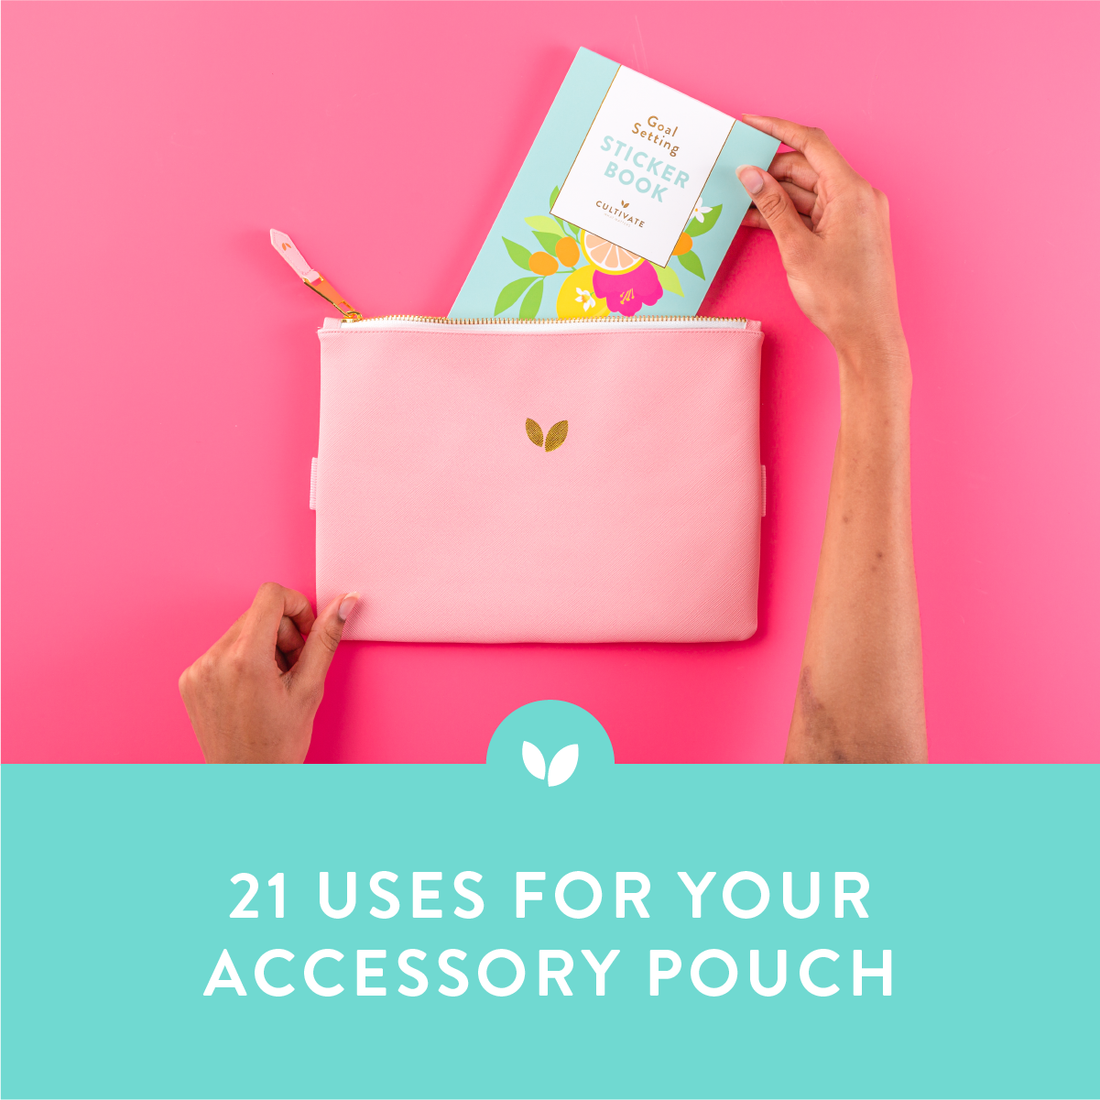 21 Uses for Your Cultivate Accessory Pouch